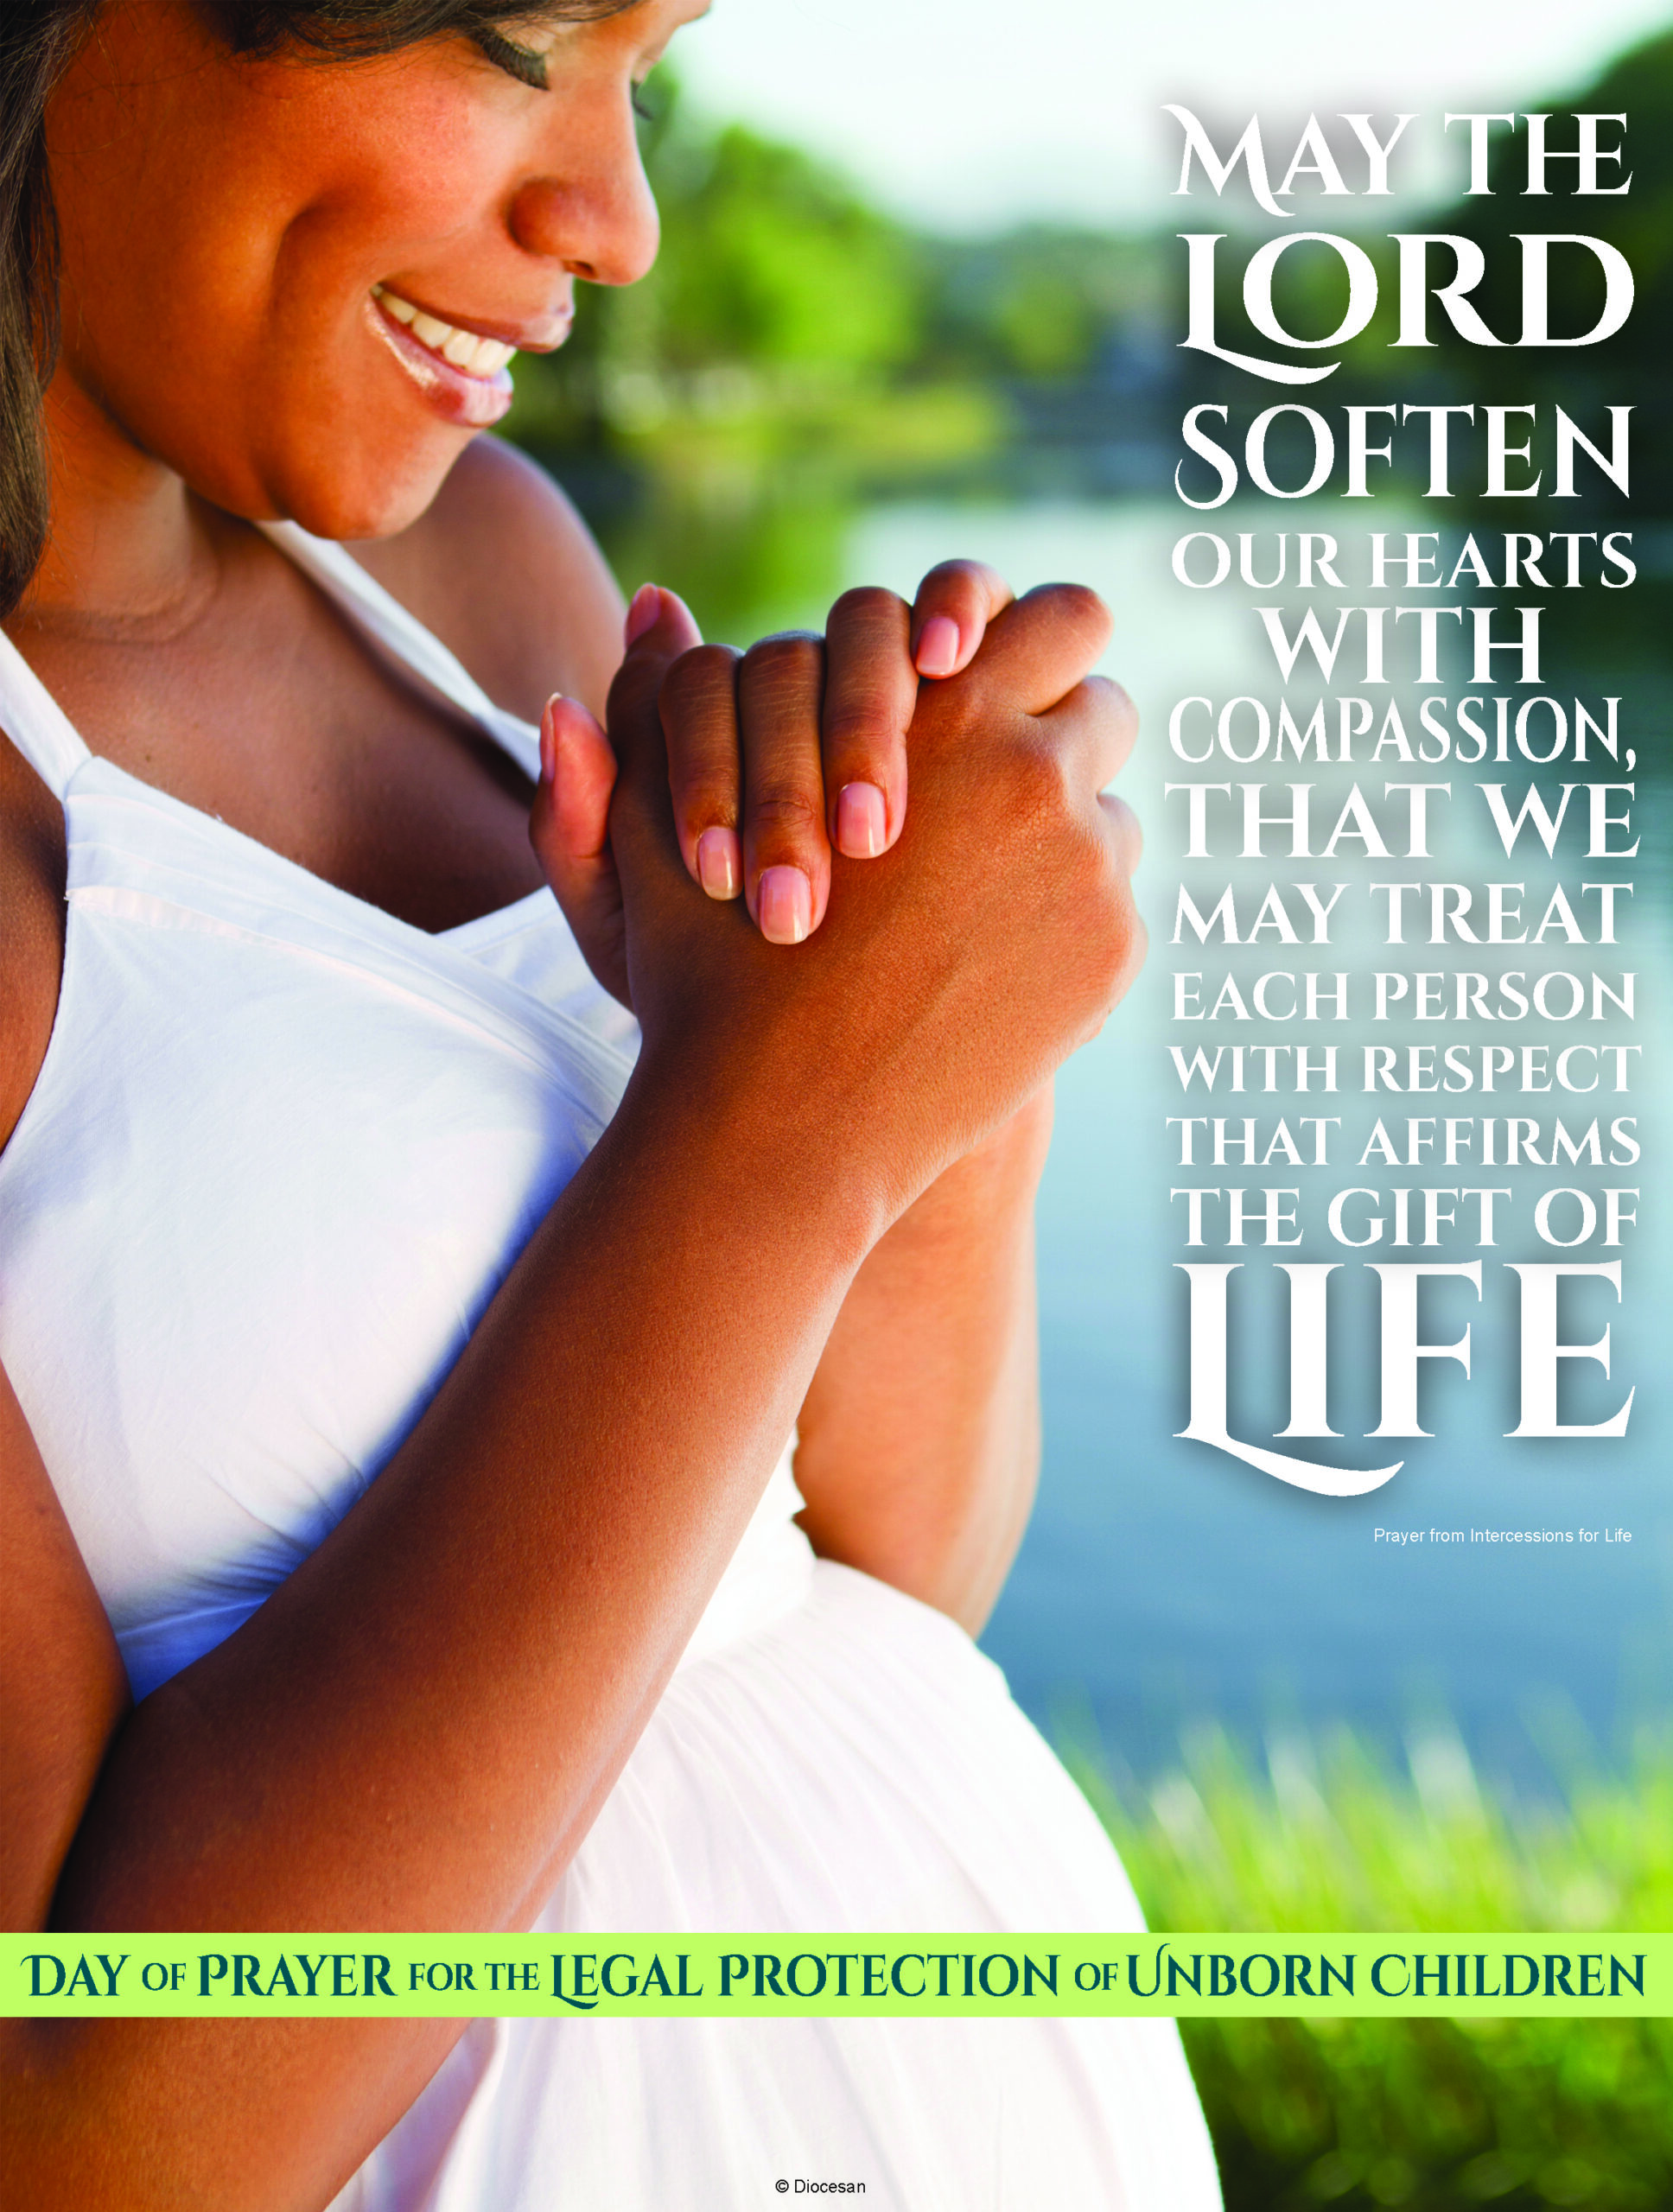 Prayer for Protection of Unborn